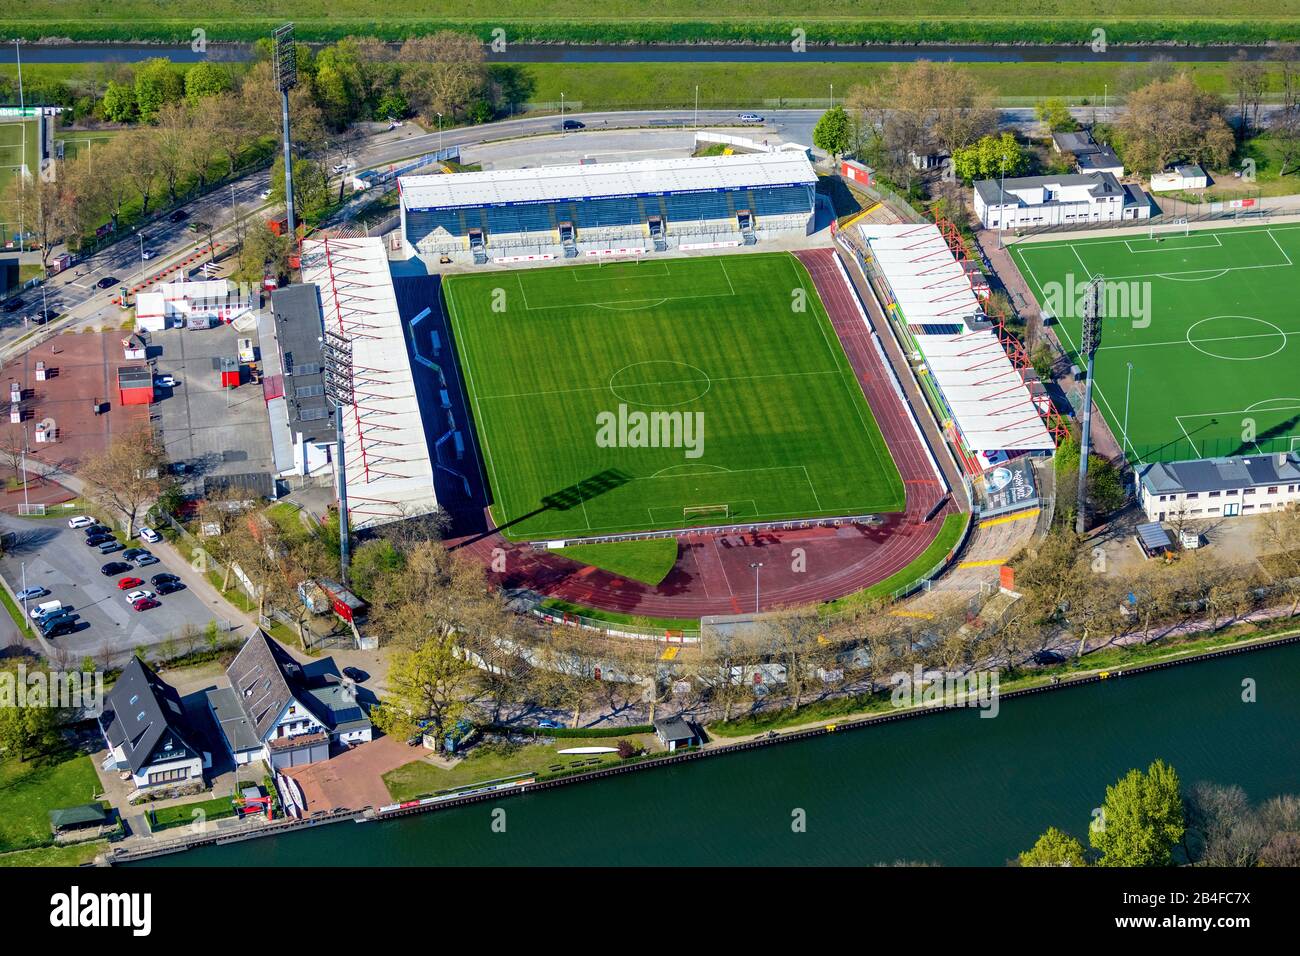 Aerial view of the football stadium Stadium Niederrhein SC Rot-Weiss Oberhausen eV, fan shop, sports and leisure facility SSB, TC Sterkrade 1869 eV in Oberhausen in the Ruhr area in the federal state of North Rhine-Westphalia, Germany. Stock Photo